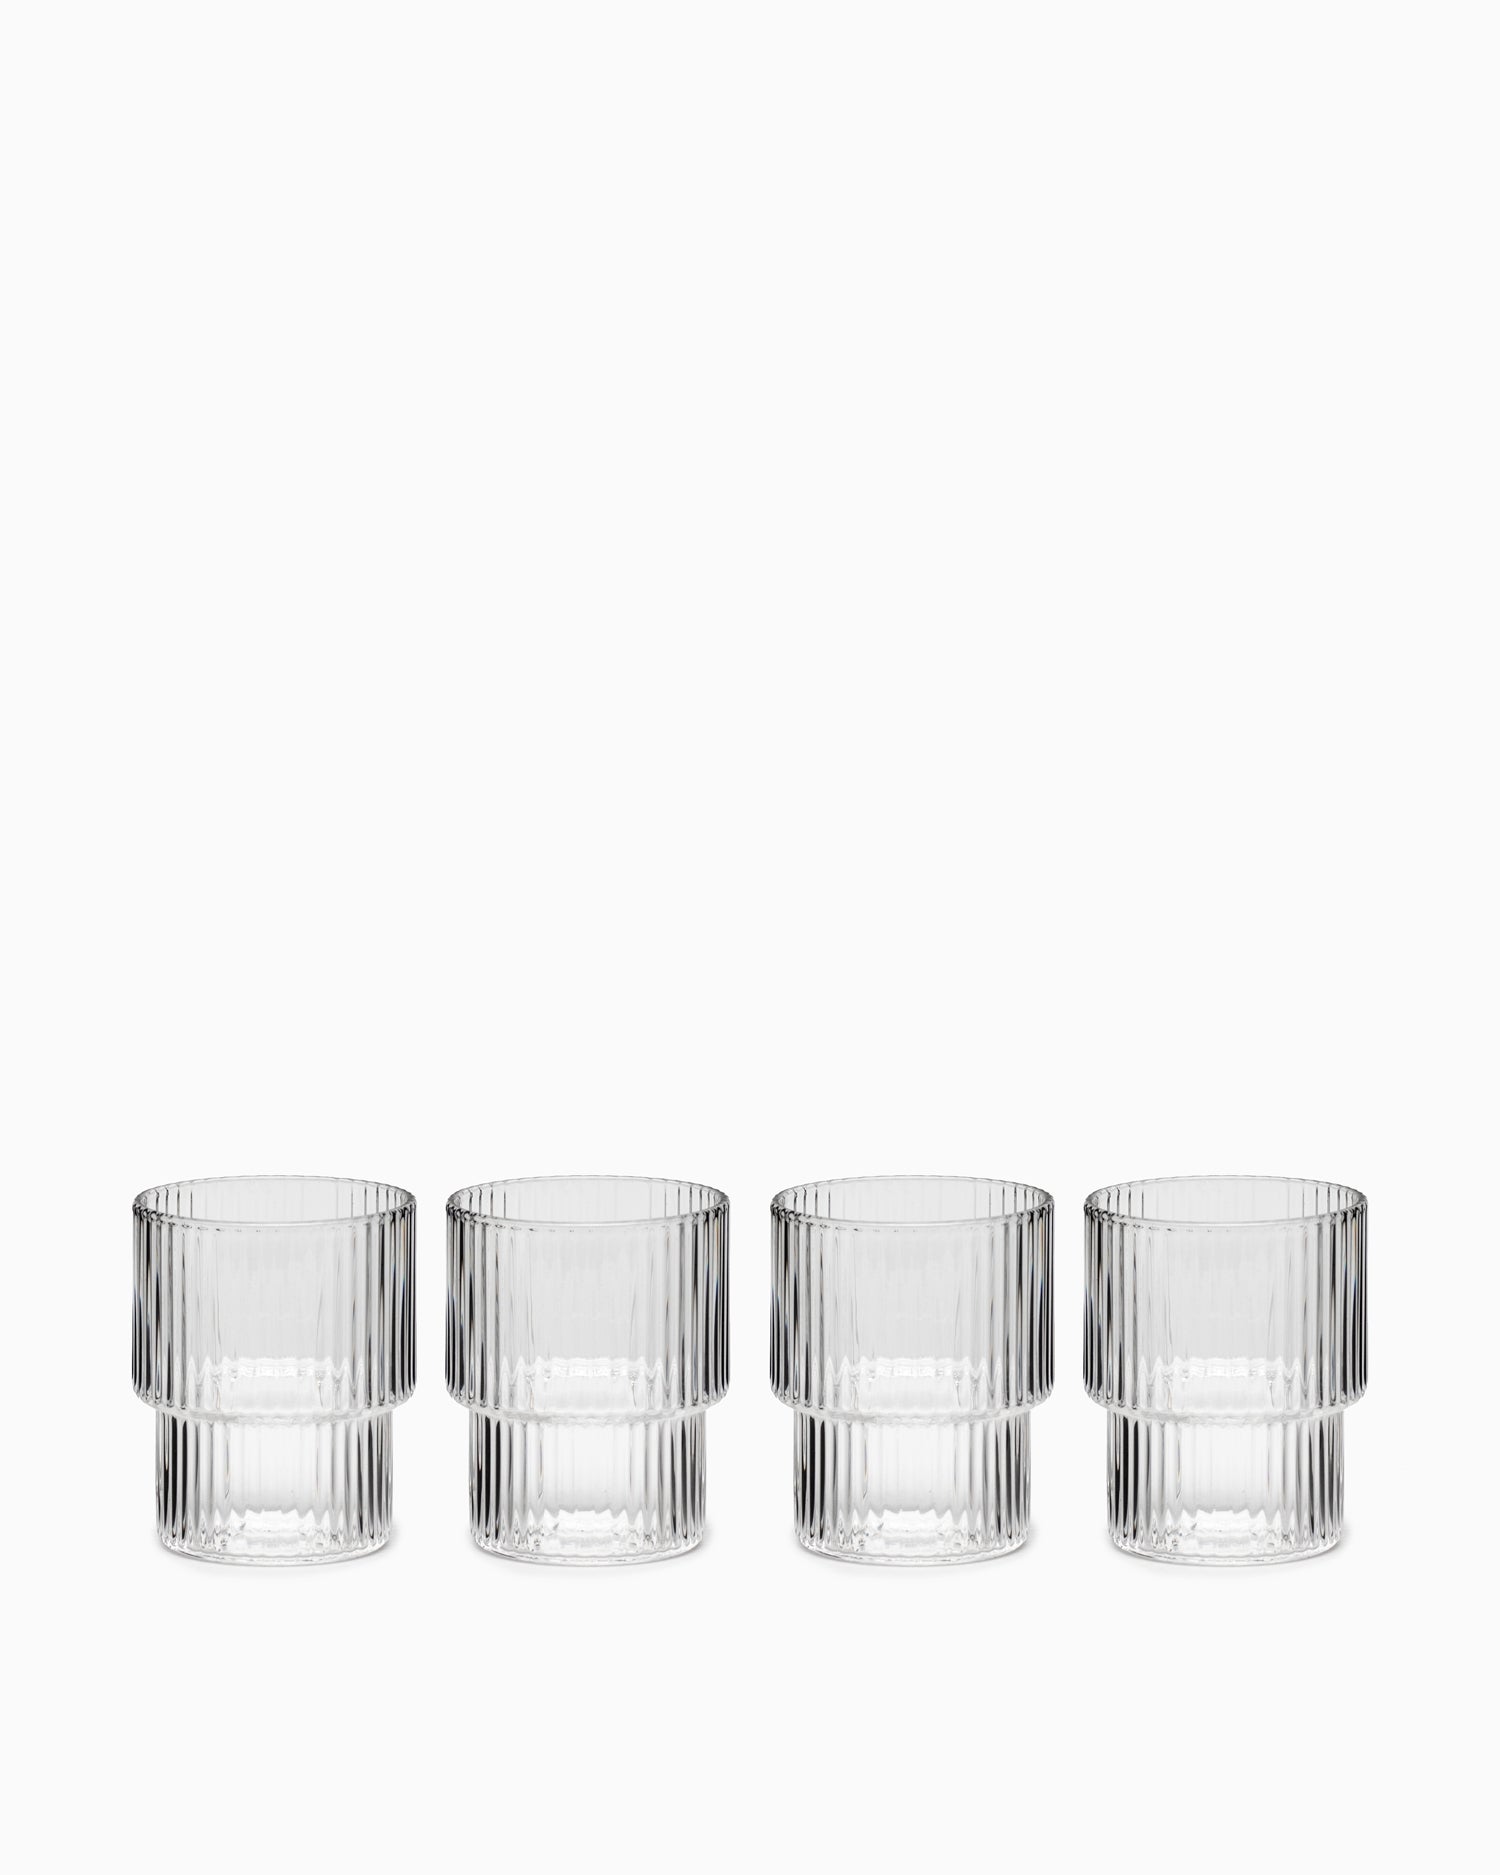 Ripple Small Glasses Set of 4 - Clear